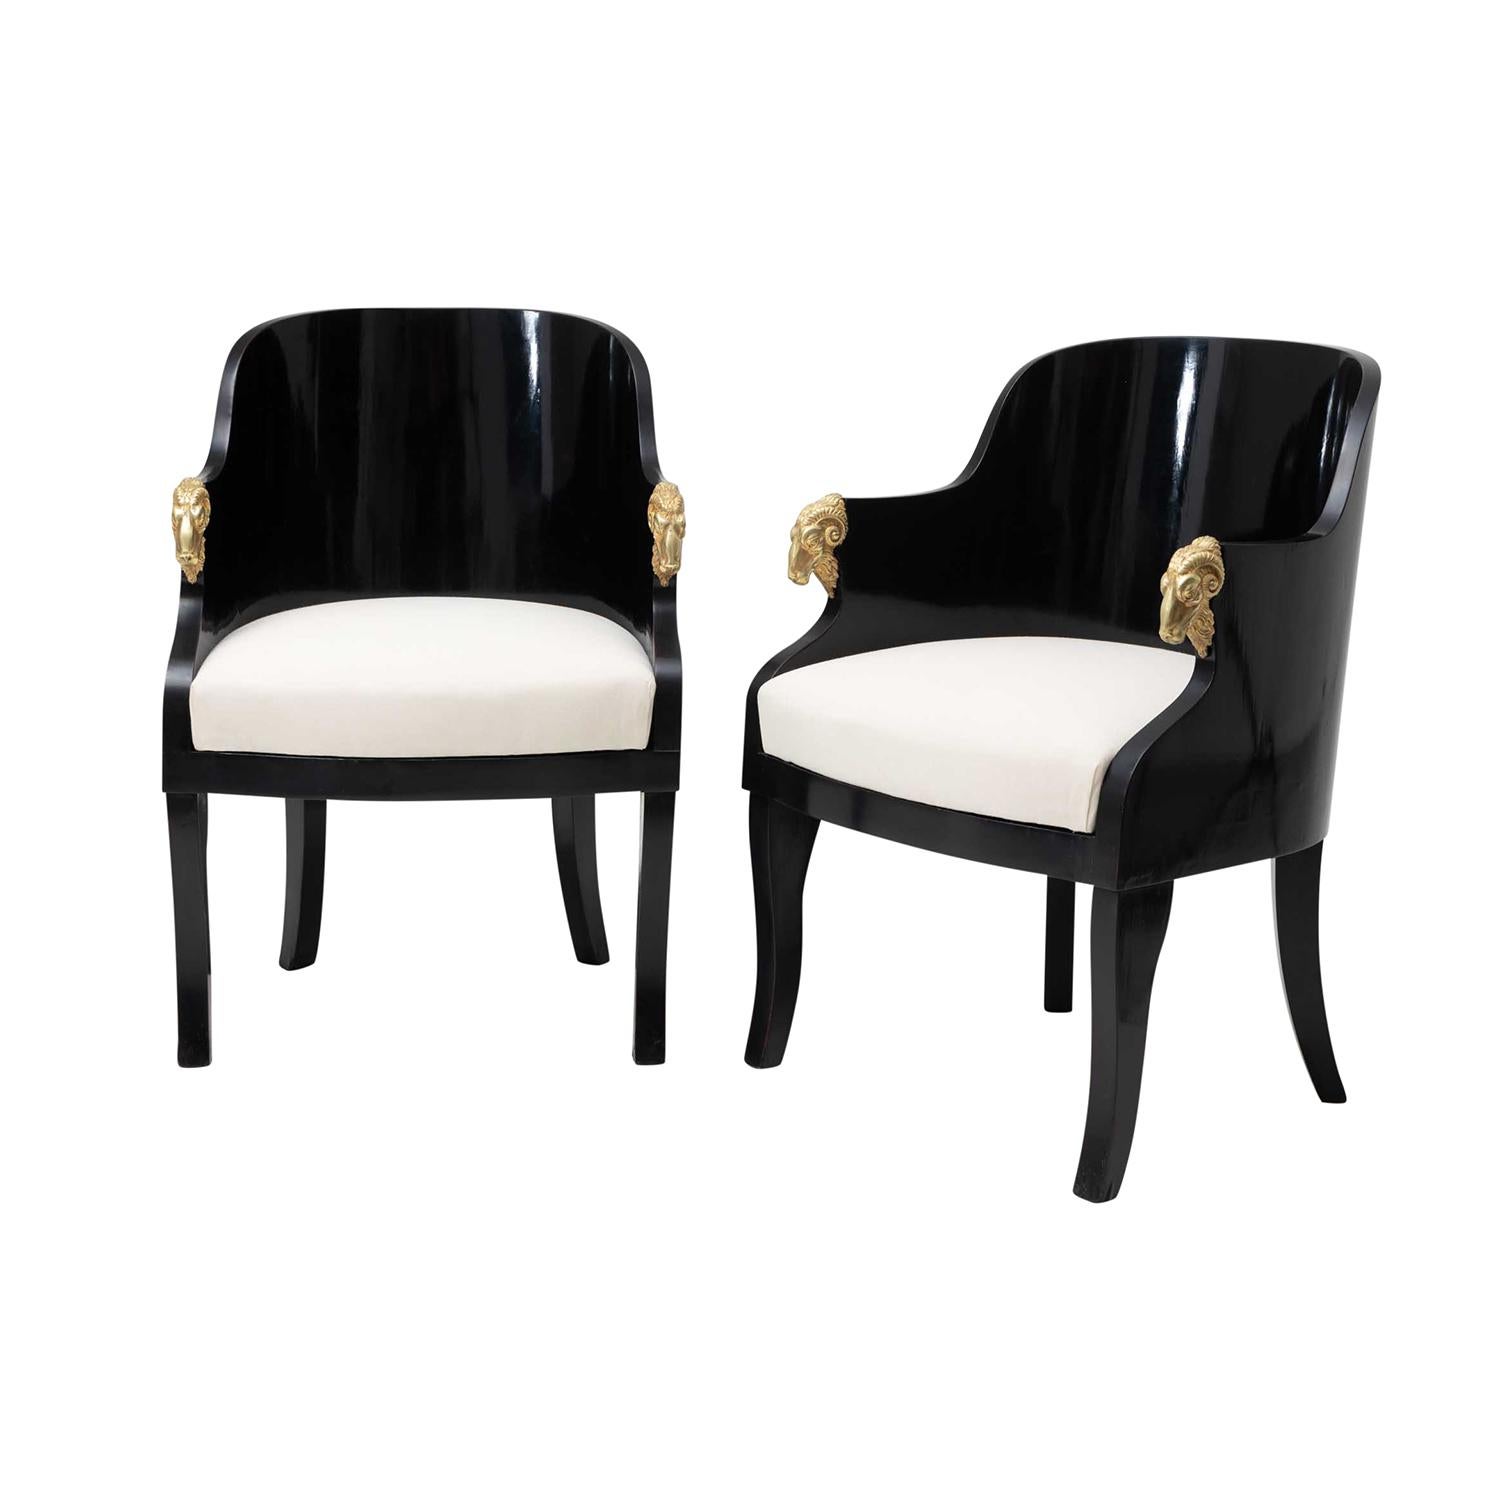 Hand-Carved 19th Century Black Baltic Pair of Lacquered Birch Armchairs, Antique Side Chairs